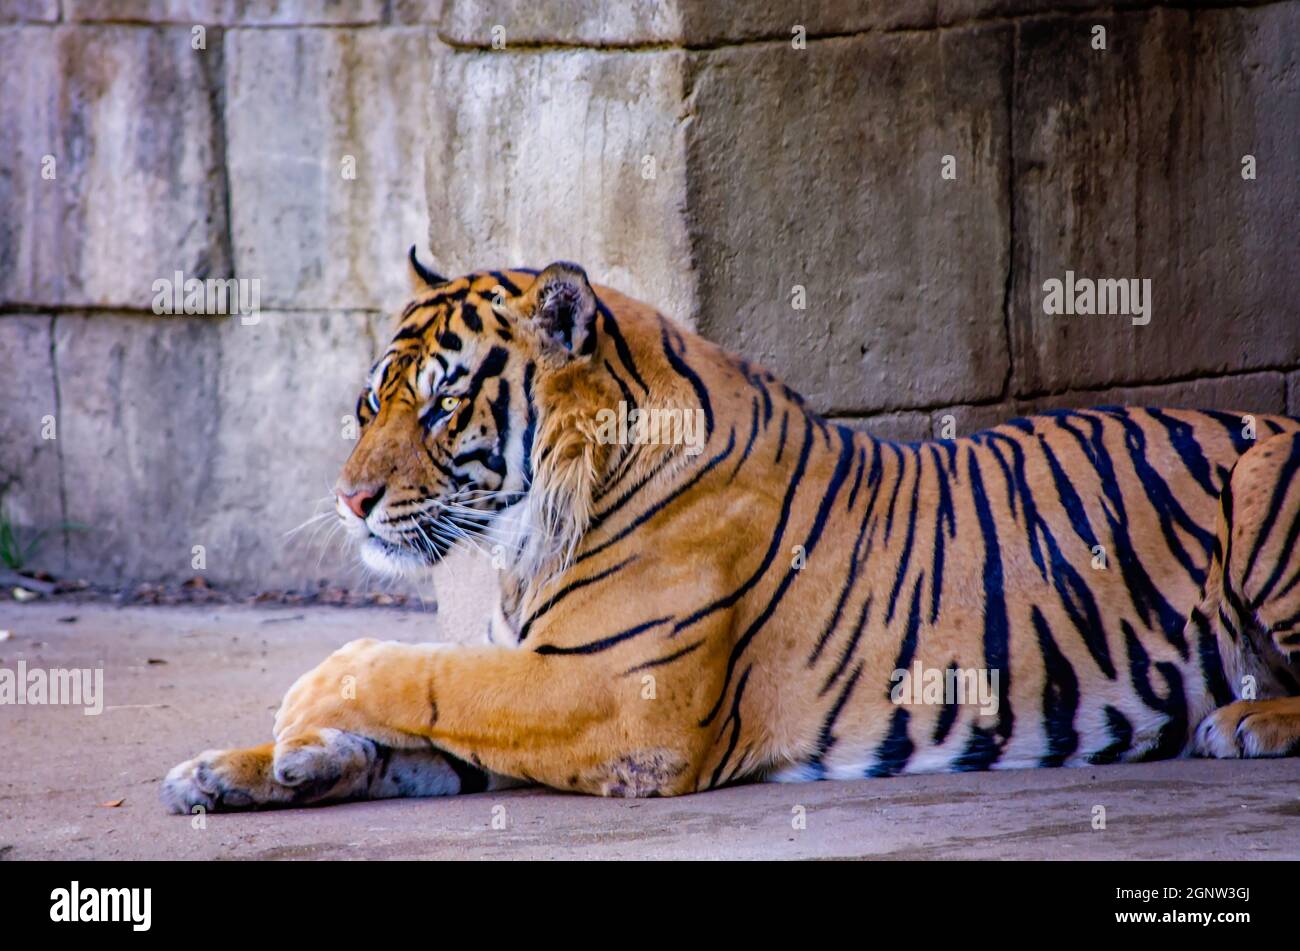 A Sumatran tiger (Panthera tigris sumatrae) rests at the Memphis Zoo, Sept. 8, 2015, in Memphis, Tennessee. The tiger is part of the zoo’s four-acre C Stock Photo